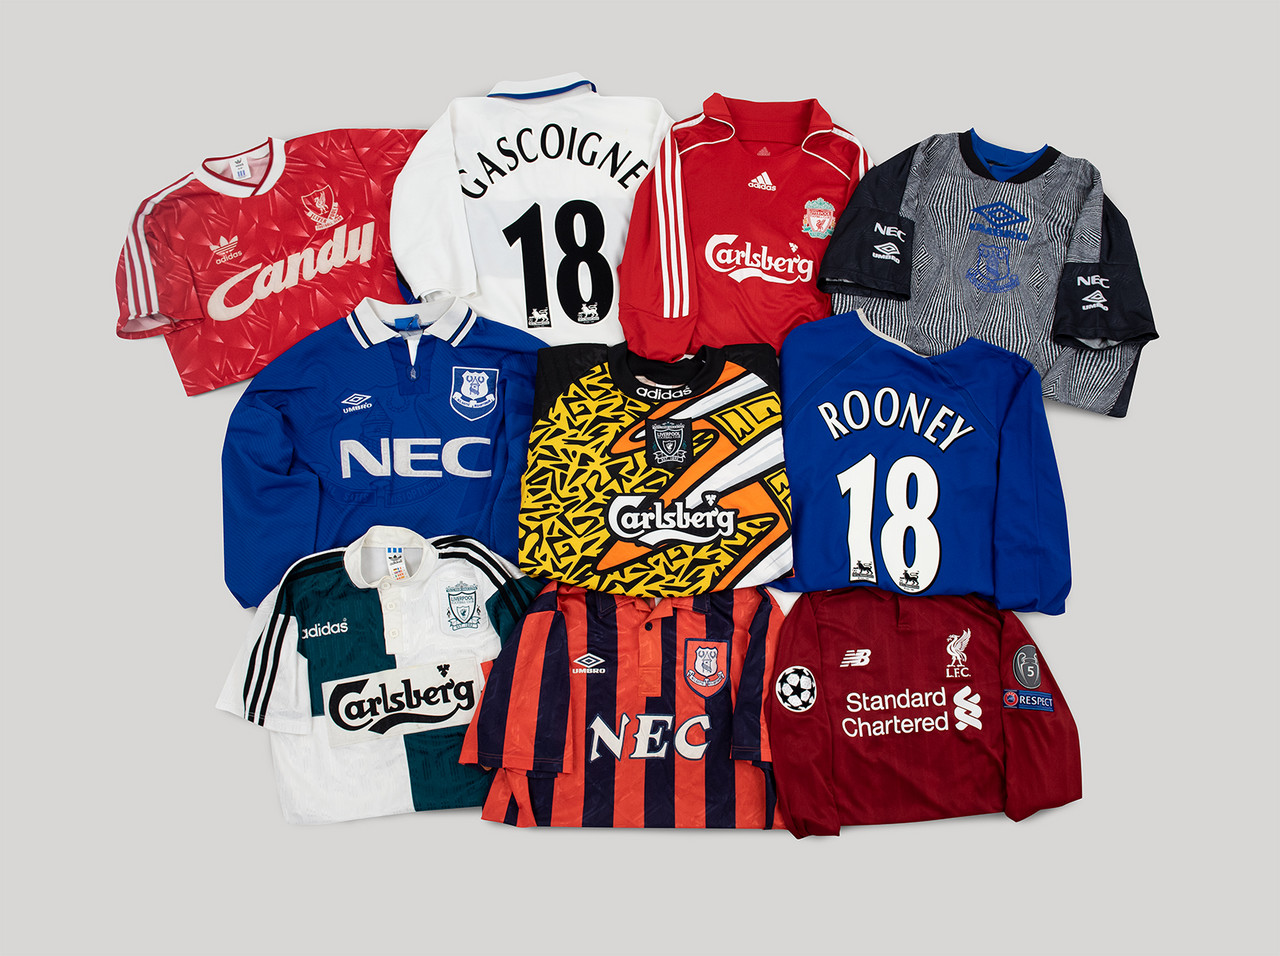 Classic Football Shirts pop-up shop opens at Albert Dock with